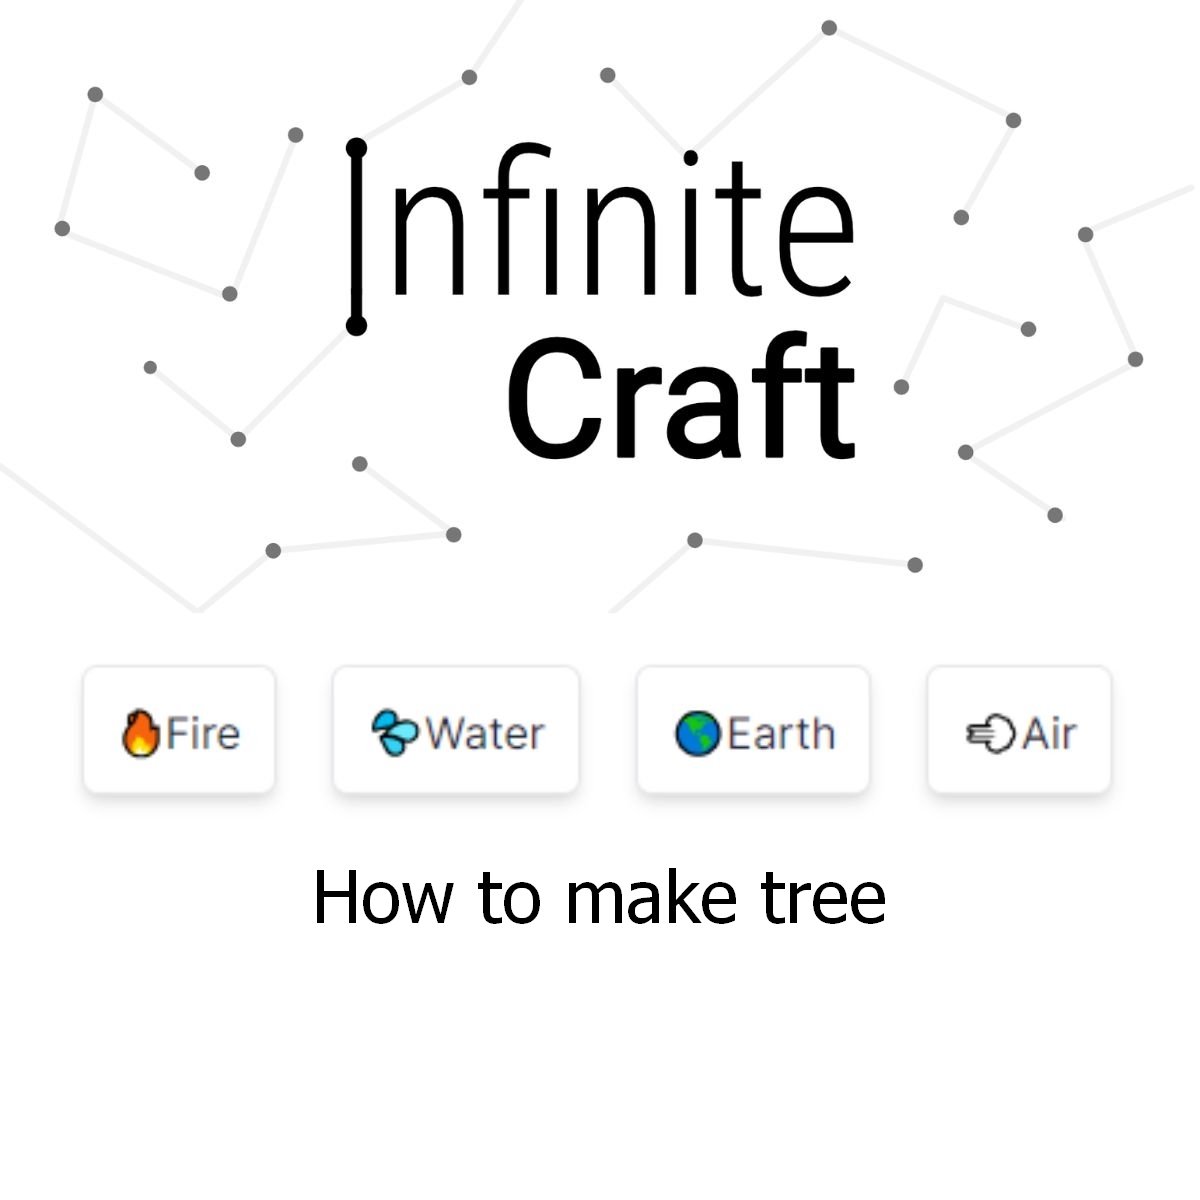 how to make tree in infinite craft